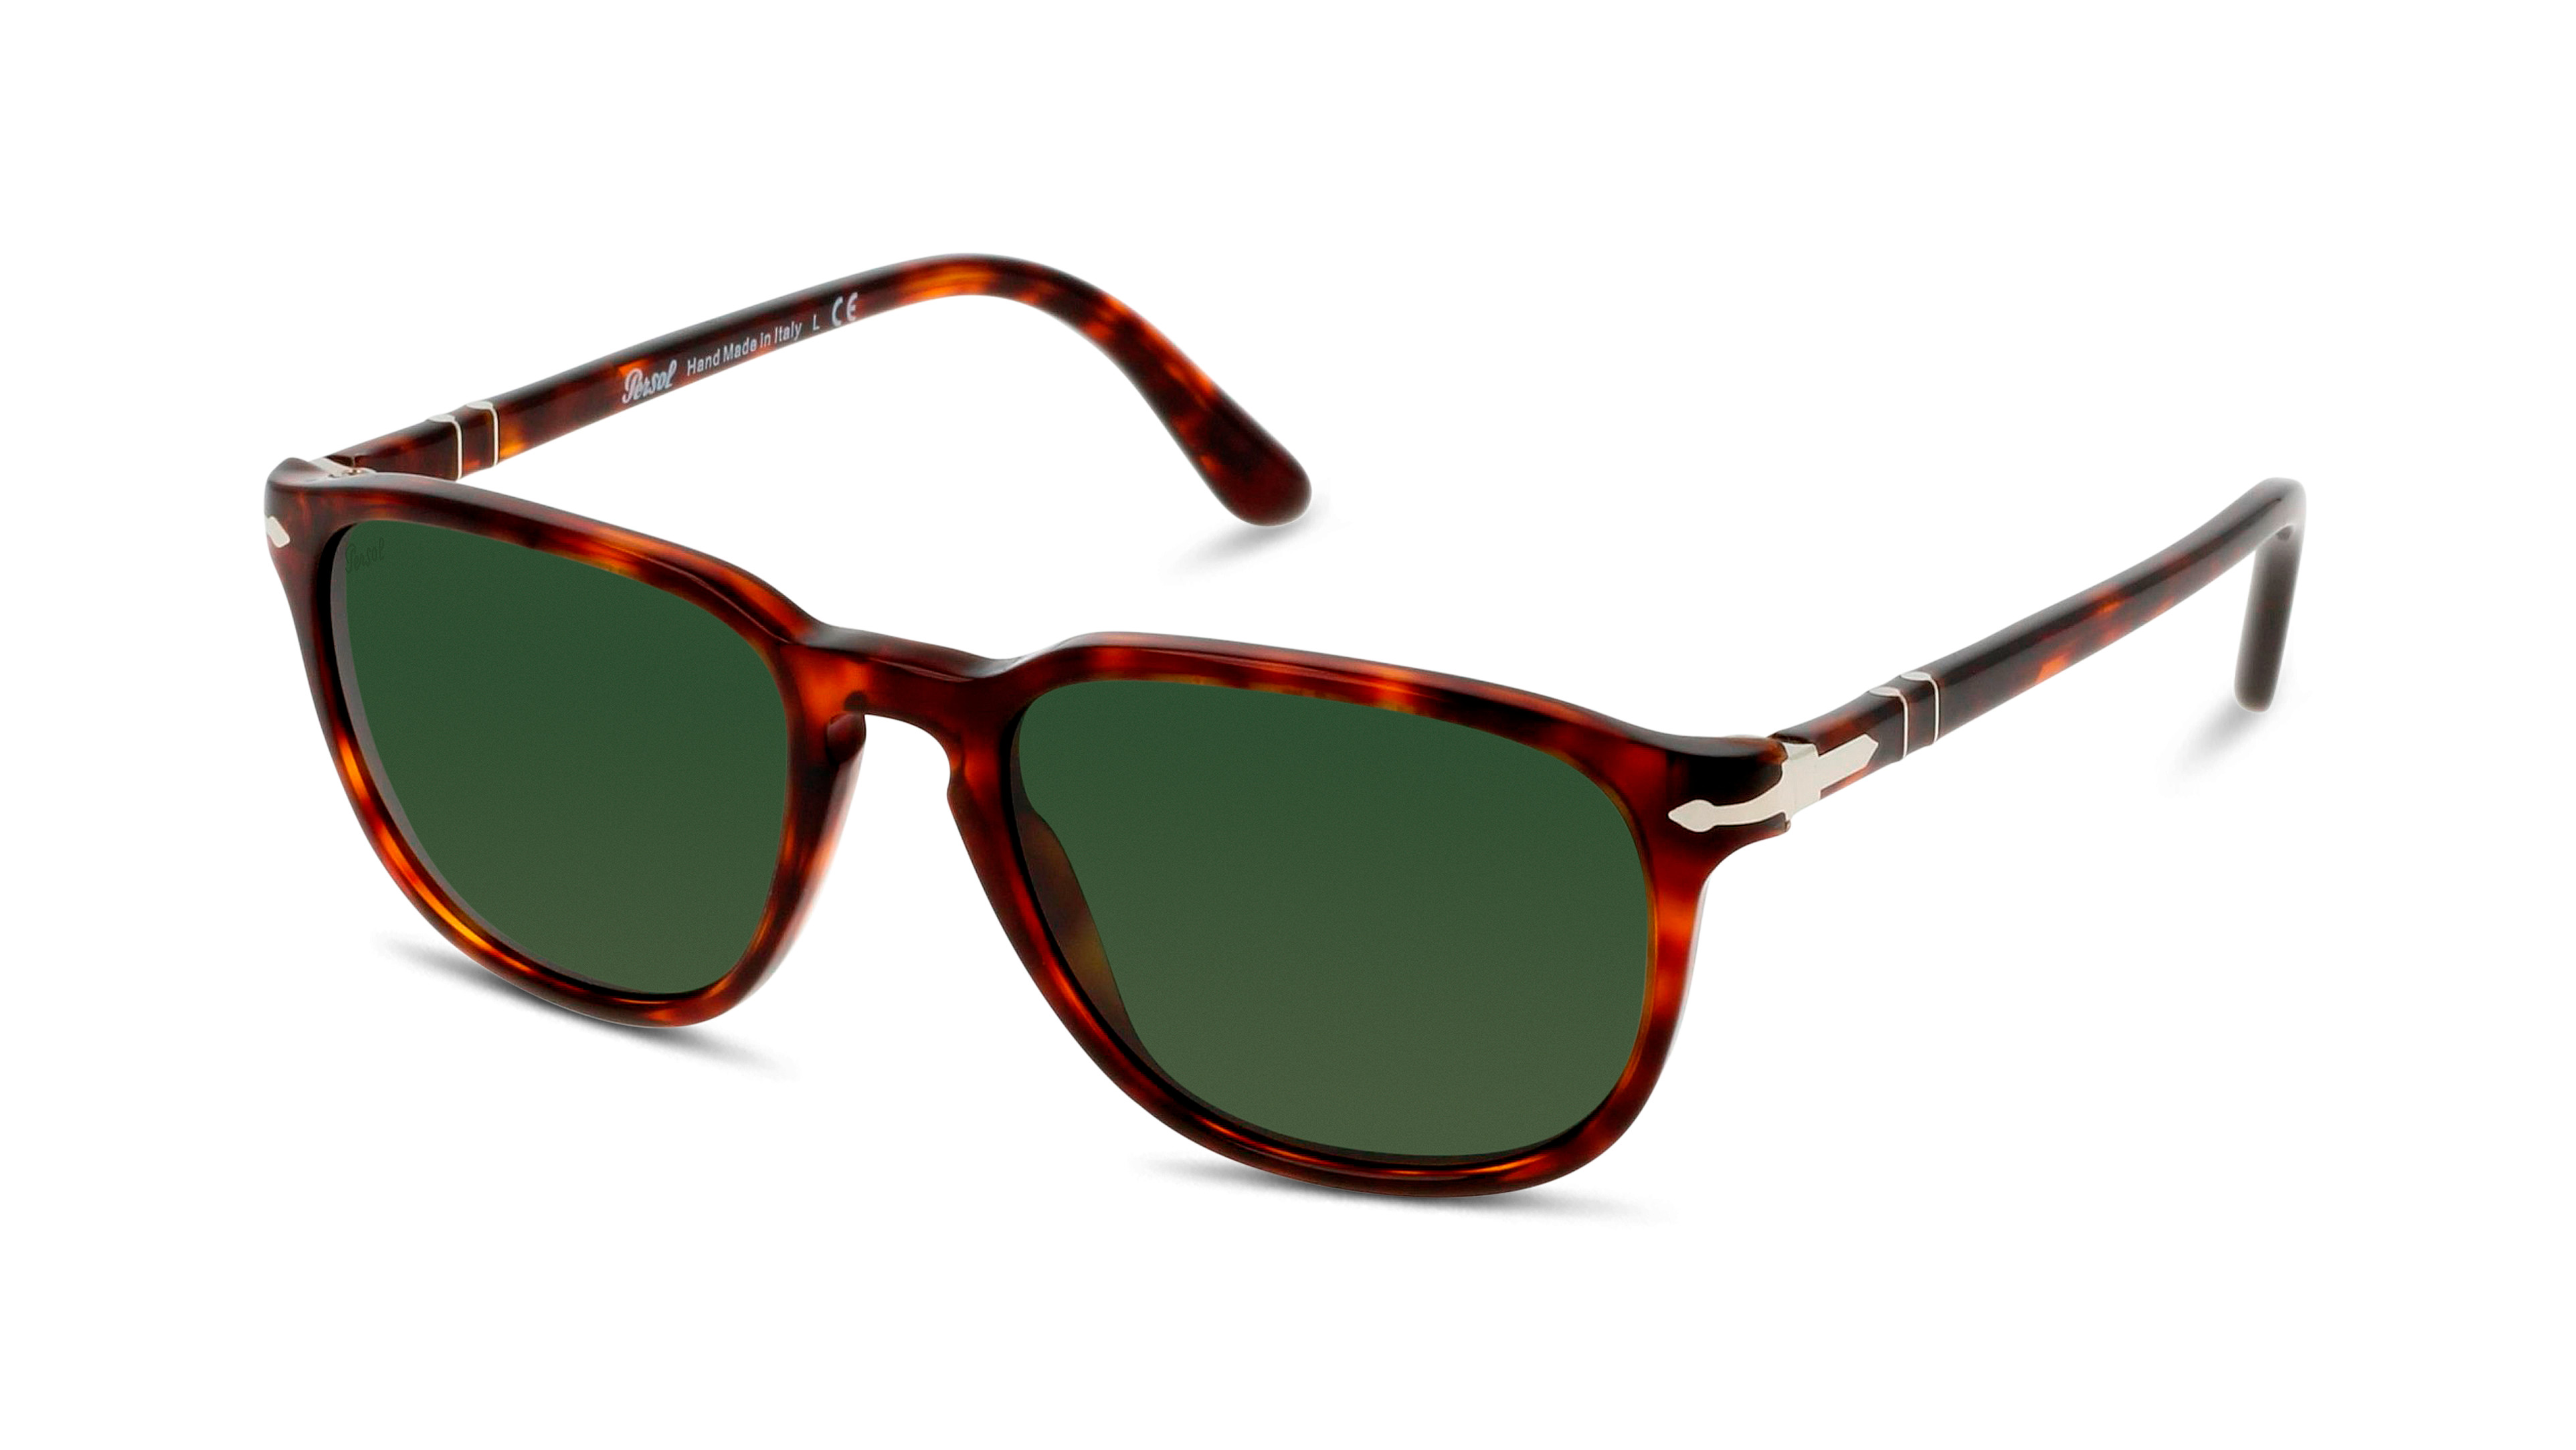 [products.image.angle_left01] Persol 0PO3019S 24/31 Sonnenbrille